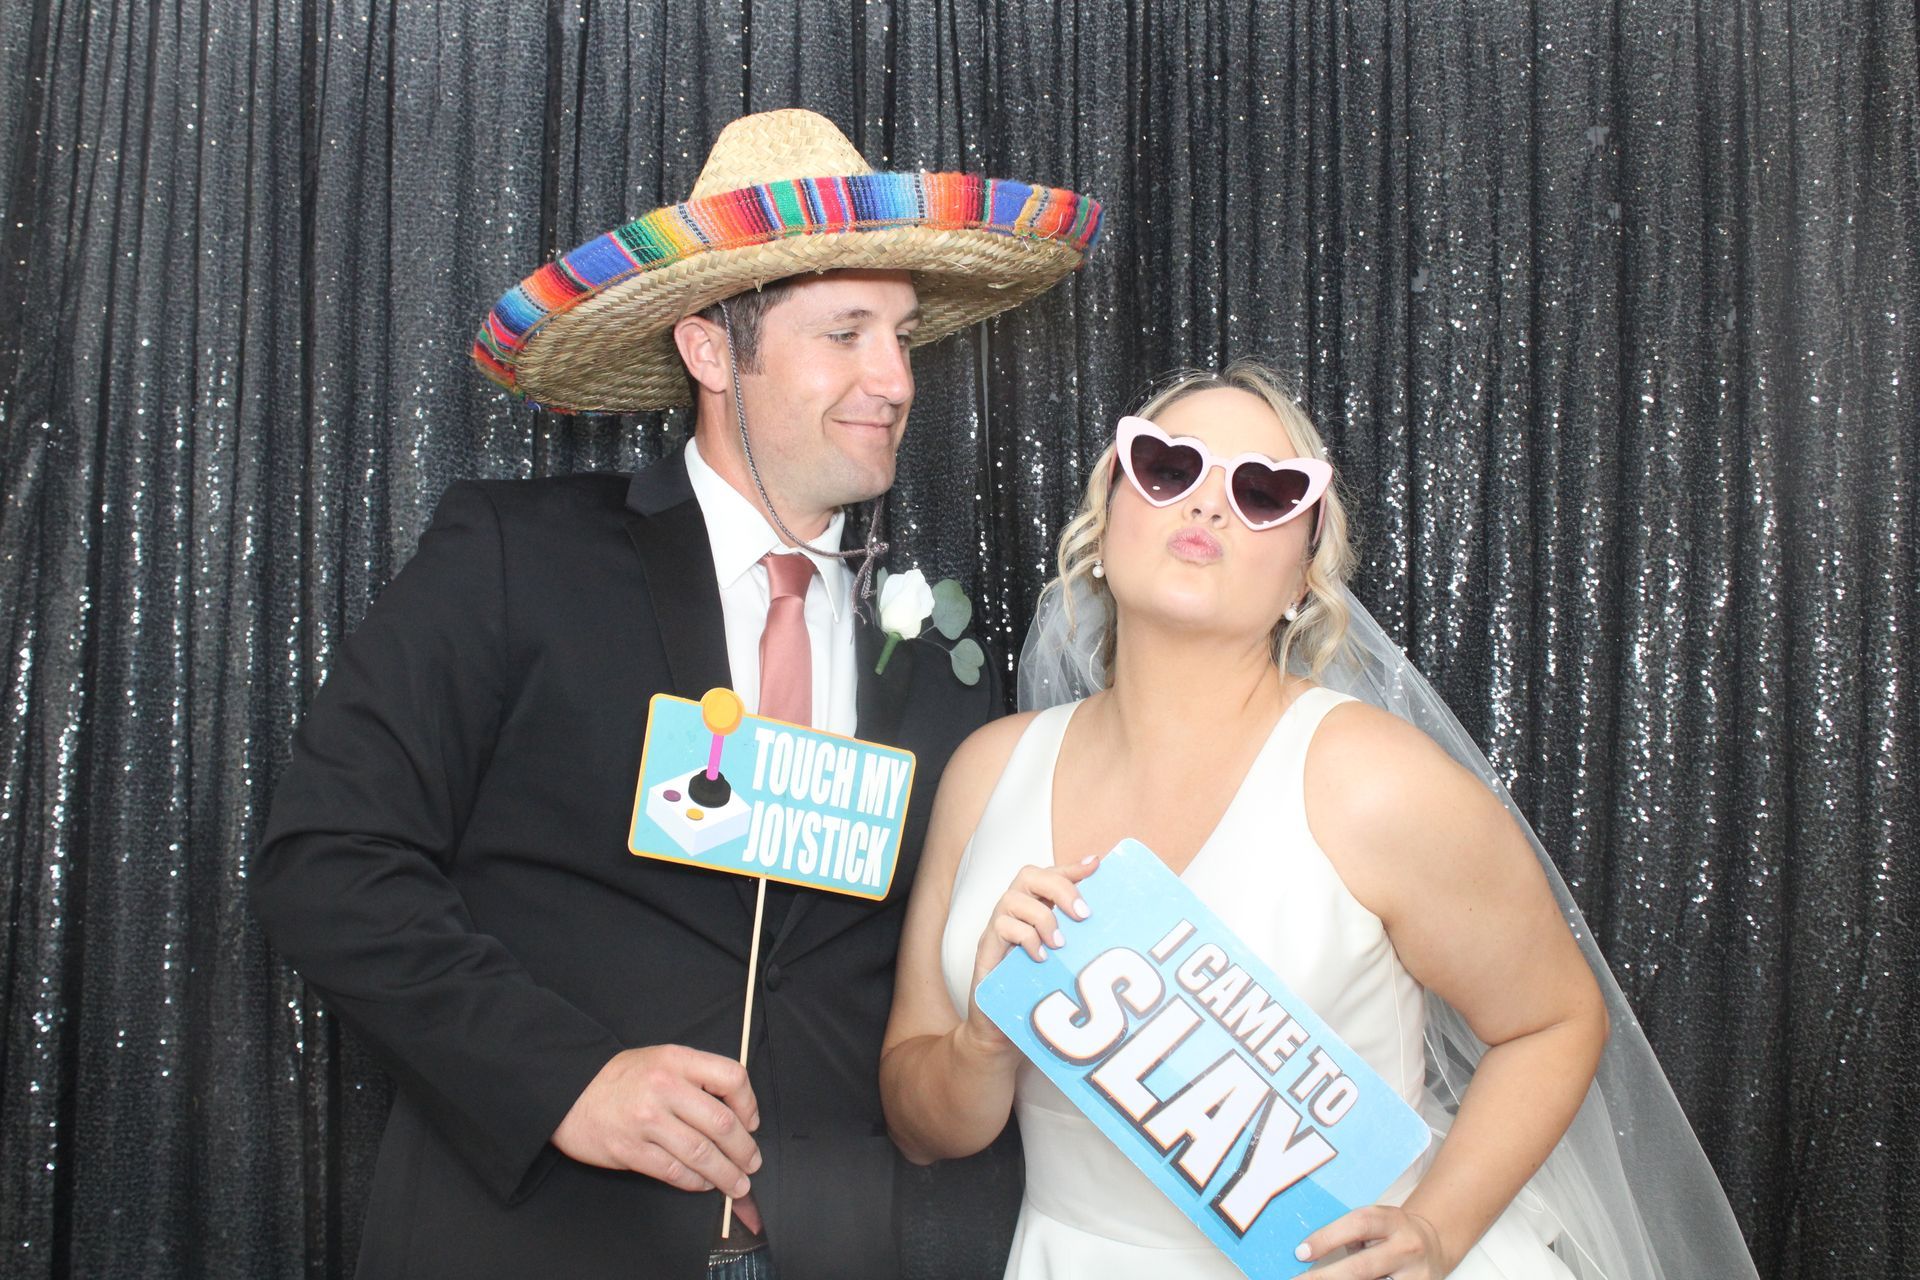 The newlywed poses for a picture in a Flash Party Photo Booth during their wedding celebration in Shreveport, Louisiana.